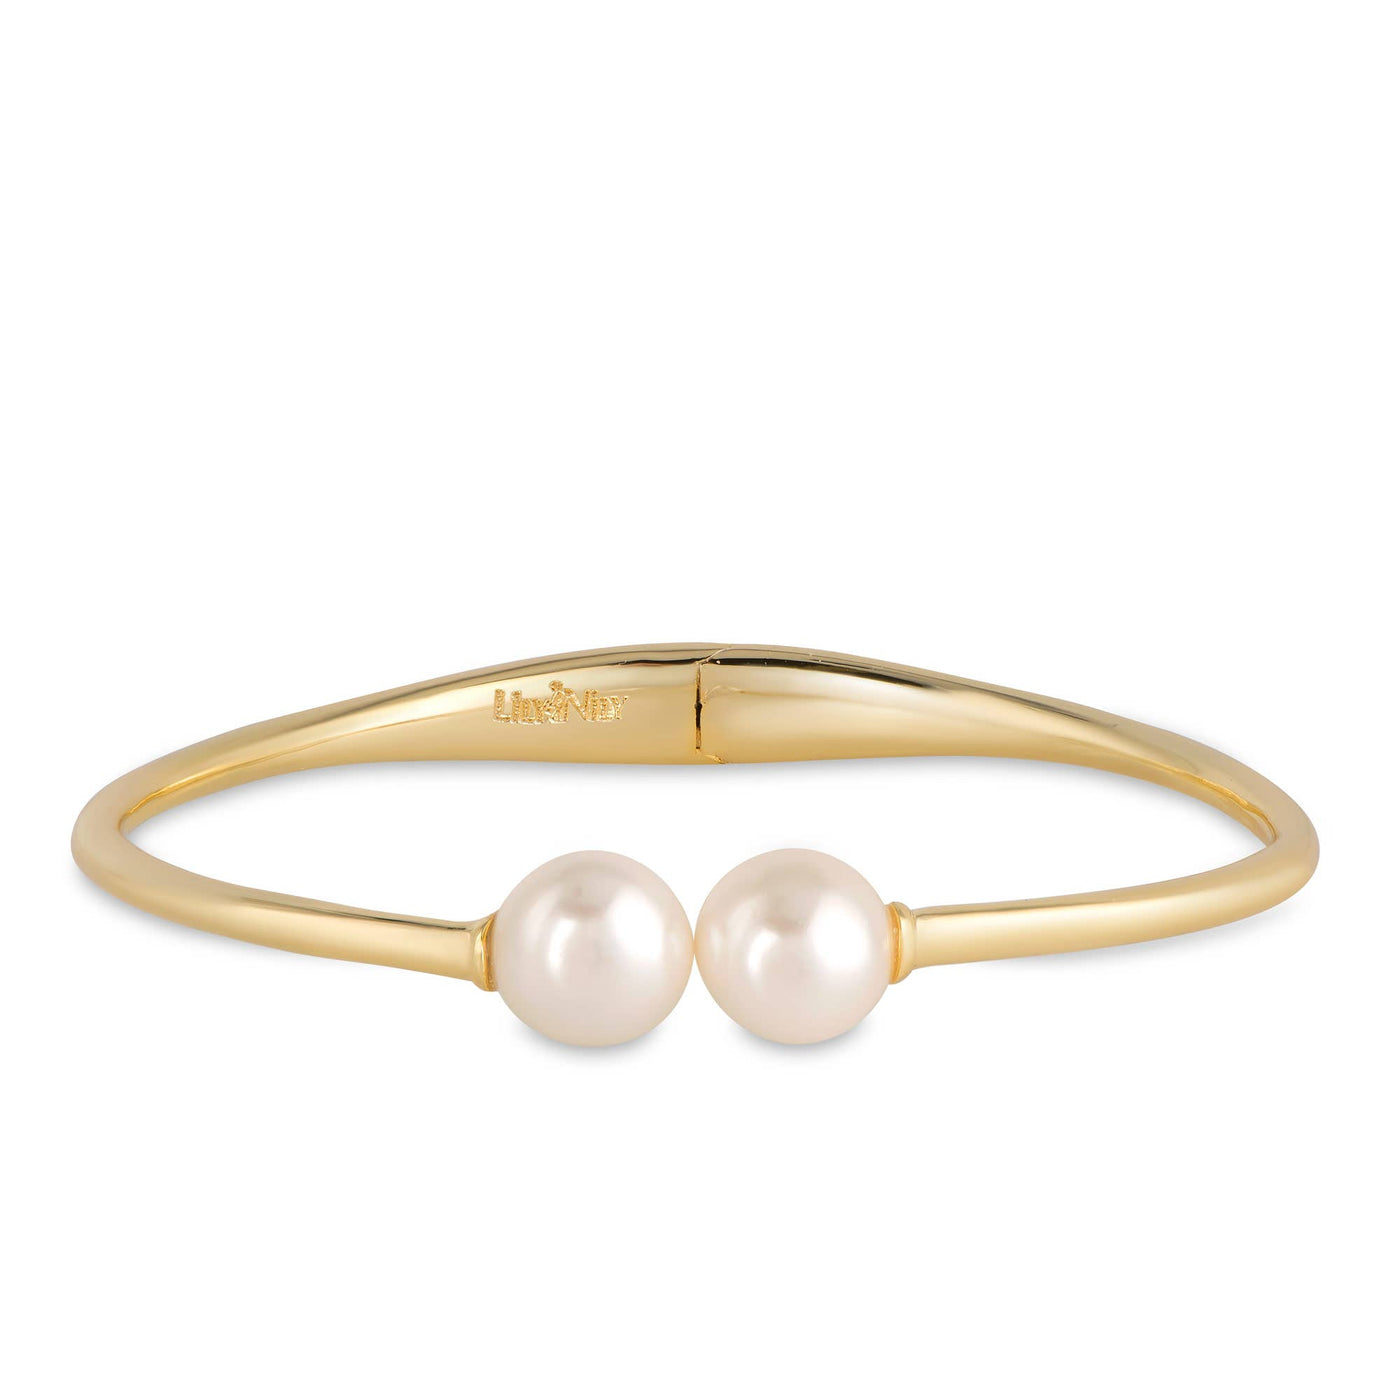 Lily Nily - Freshwater Pearl Bangle - Mumzie's Children